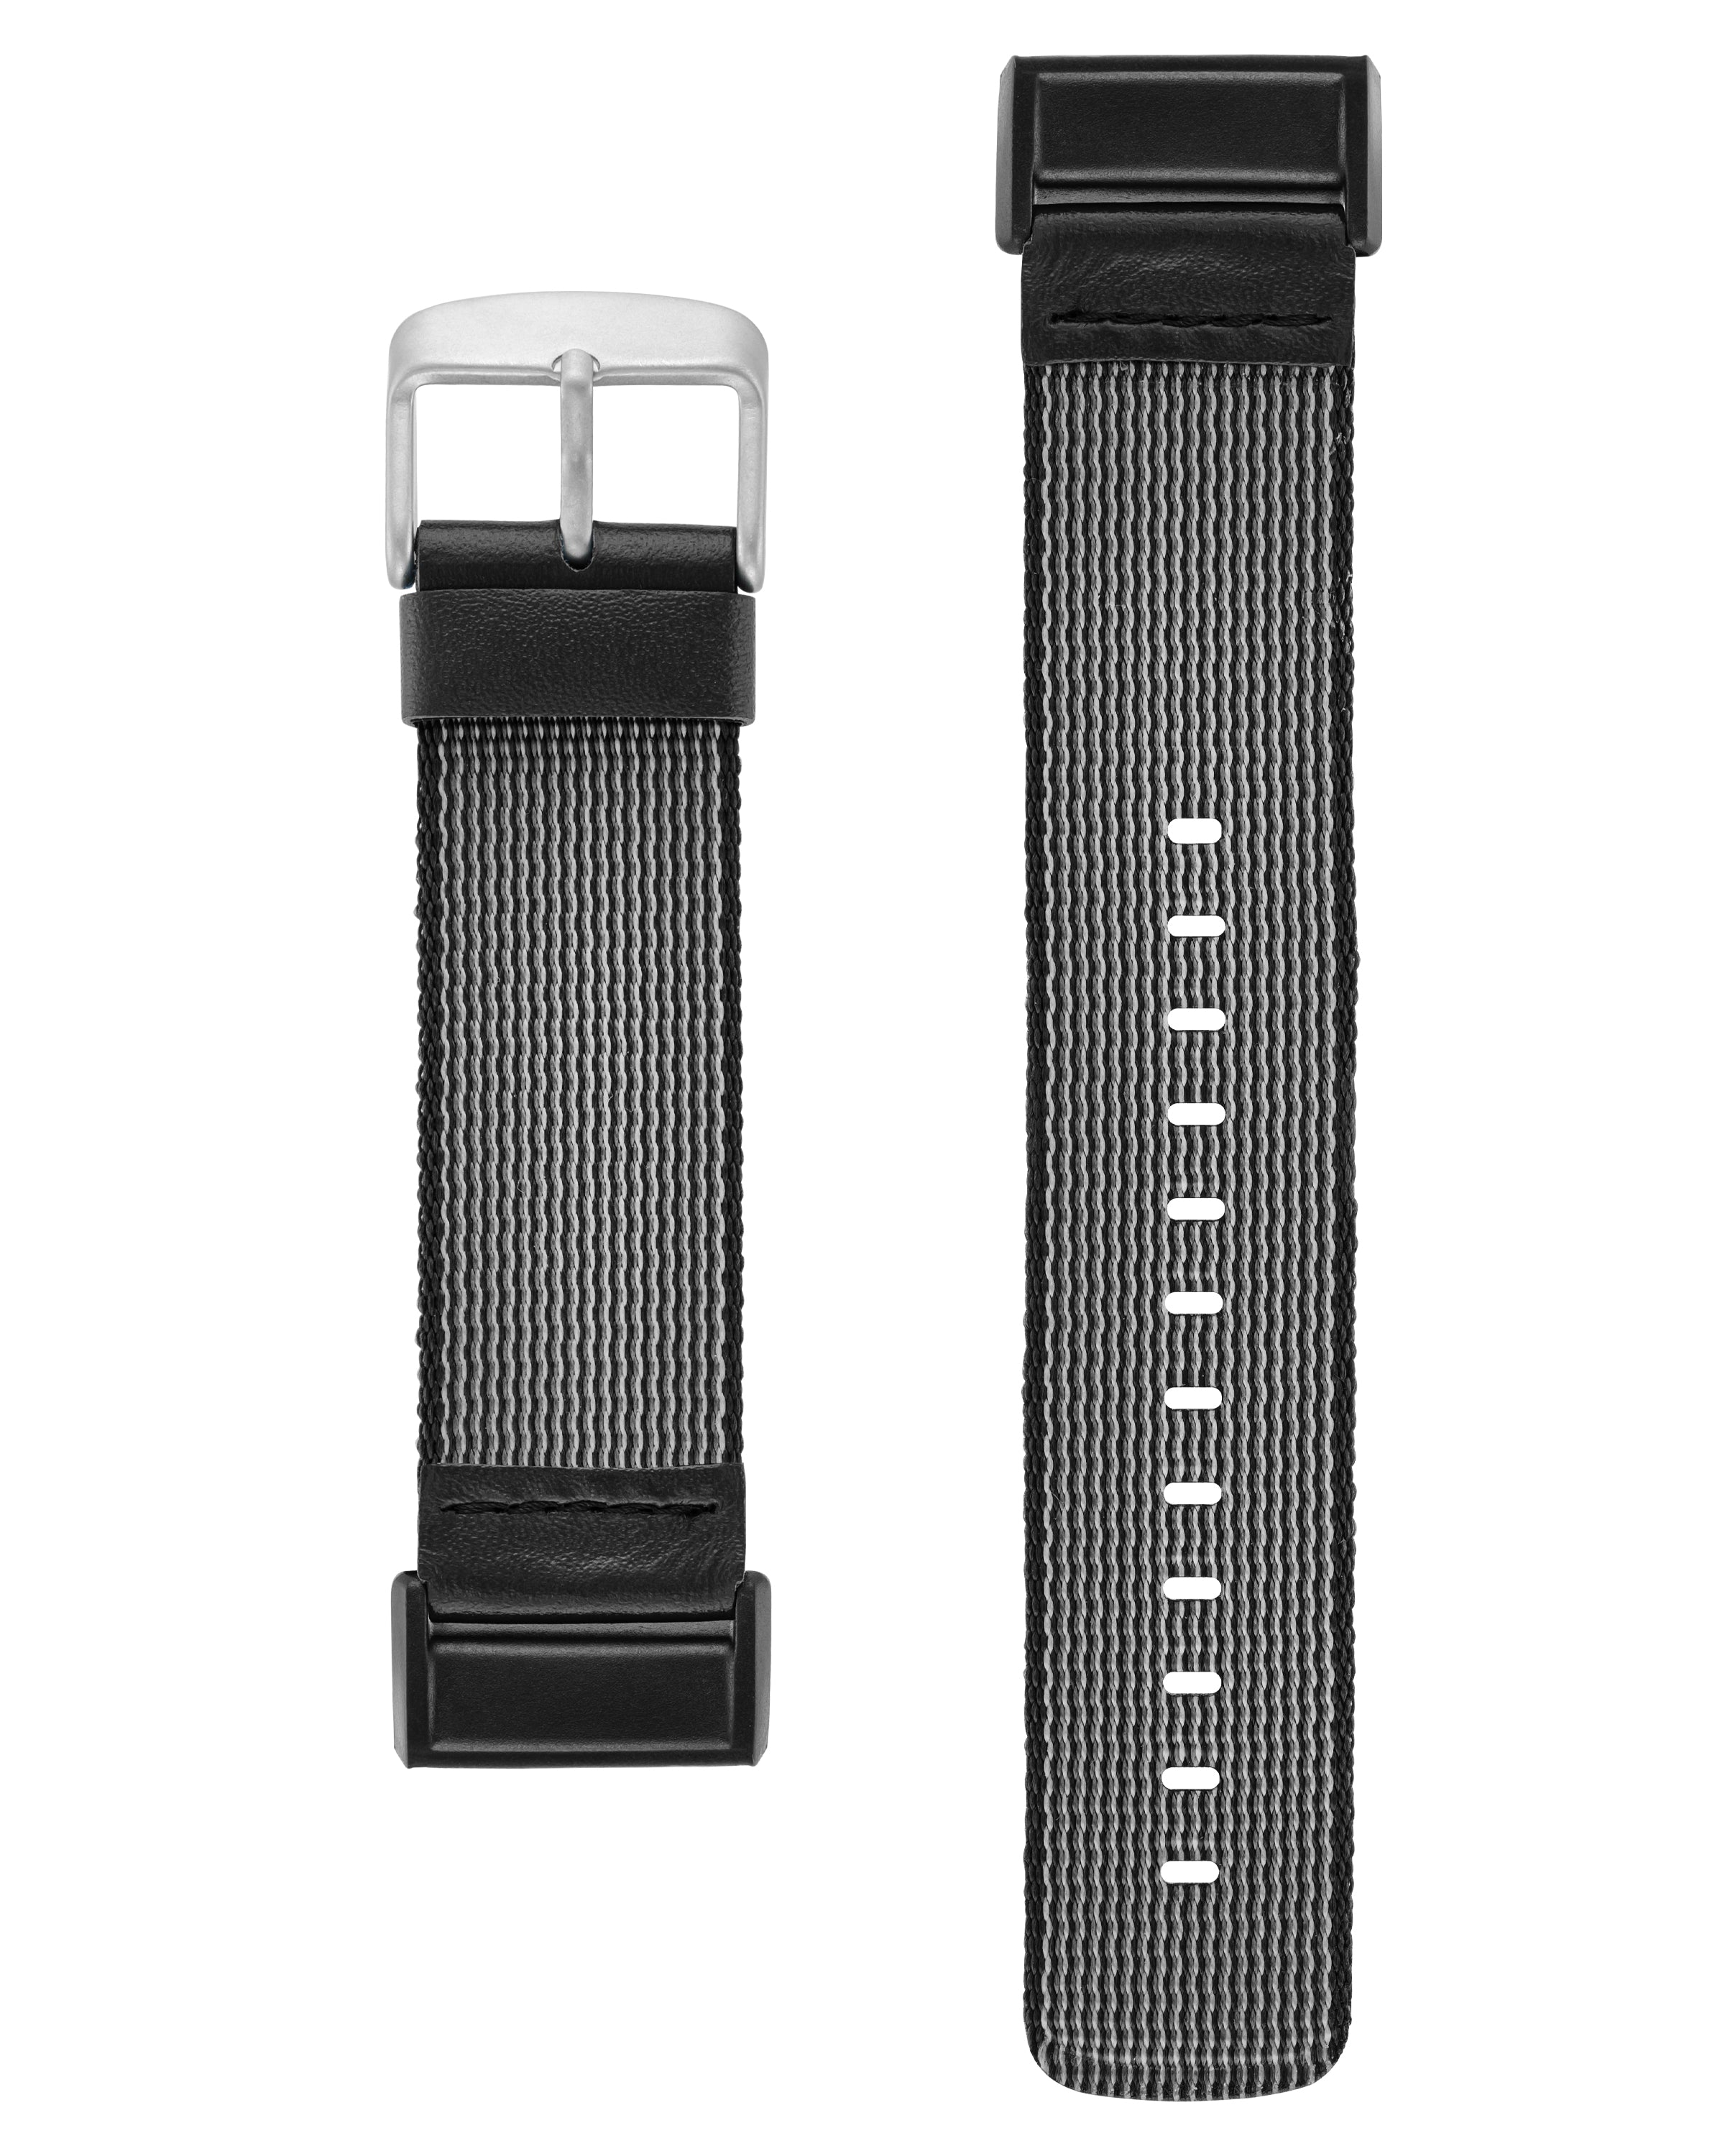 Nylon Band for Fitbit Charge